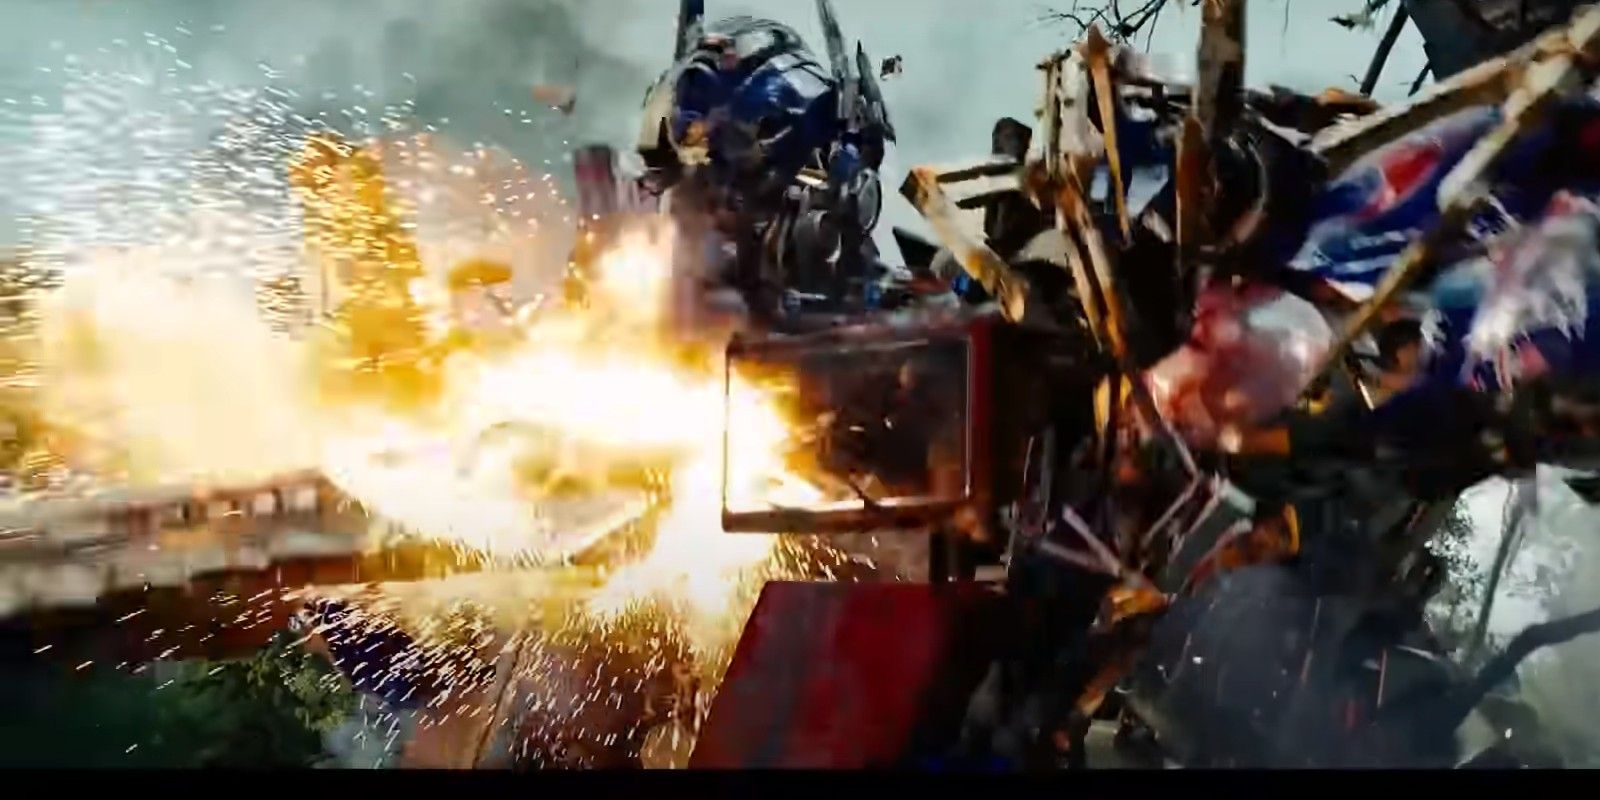 Optimus Prime stabbed in the back by megatron in Transformers revenge of the fallen